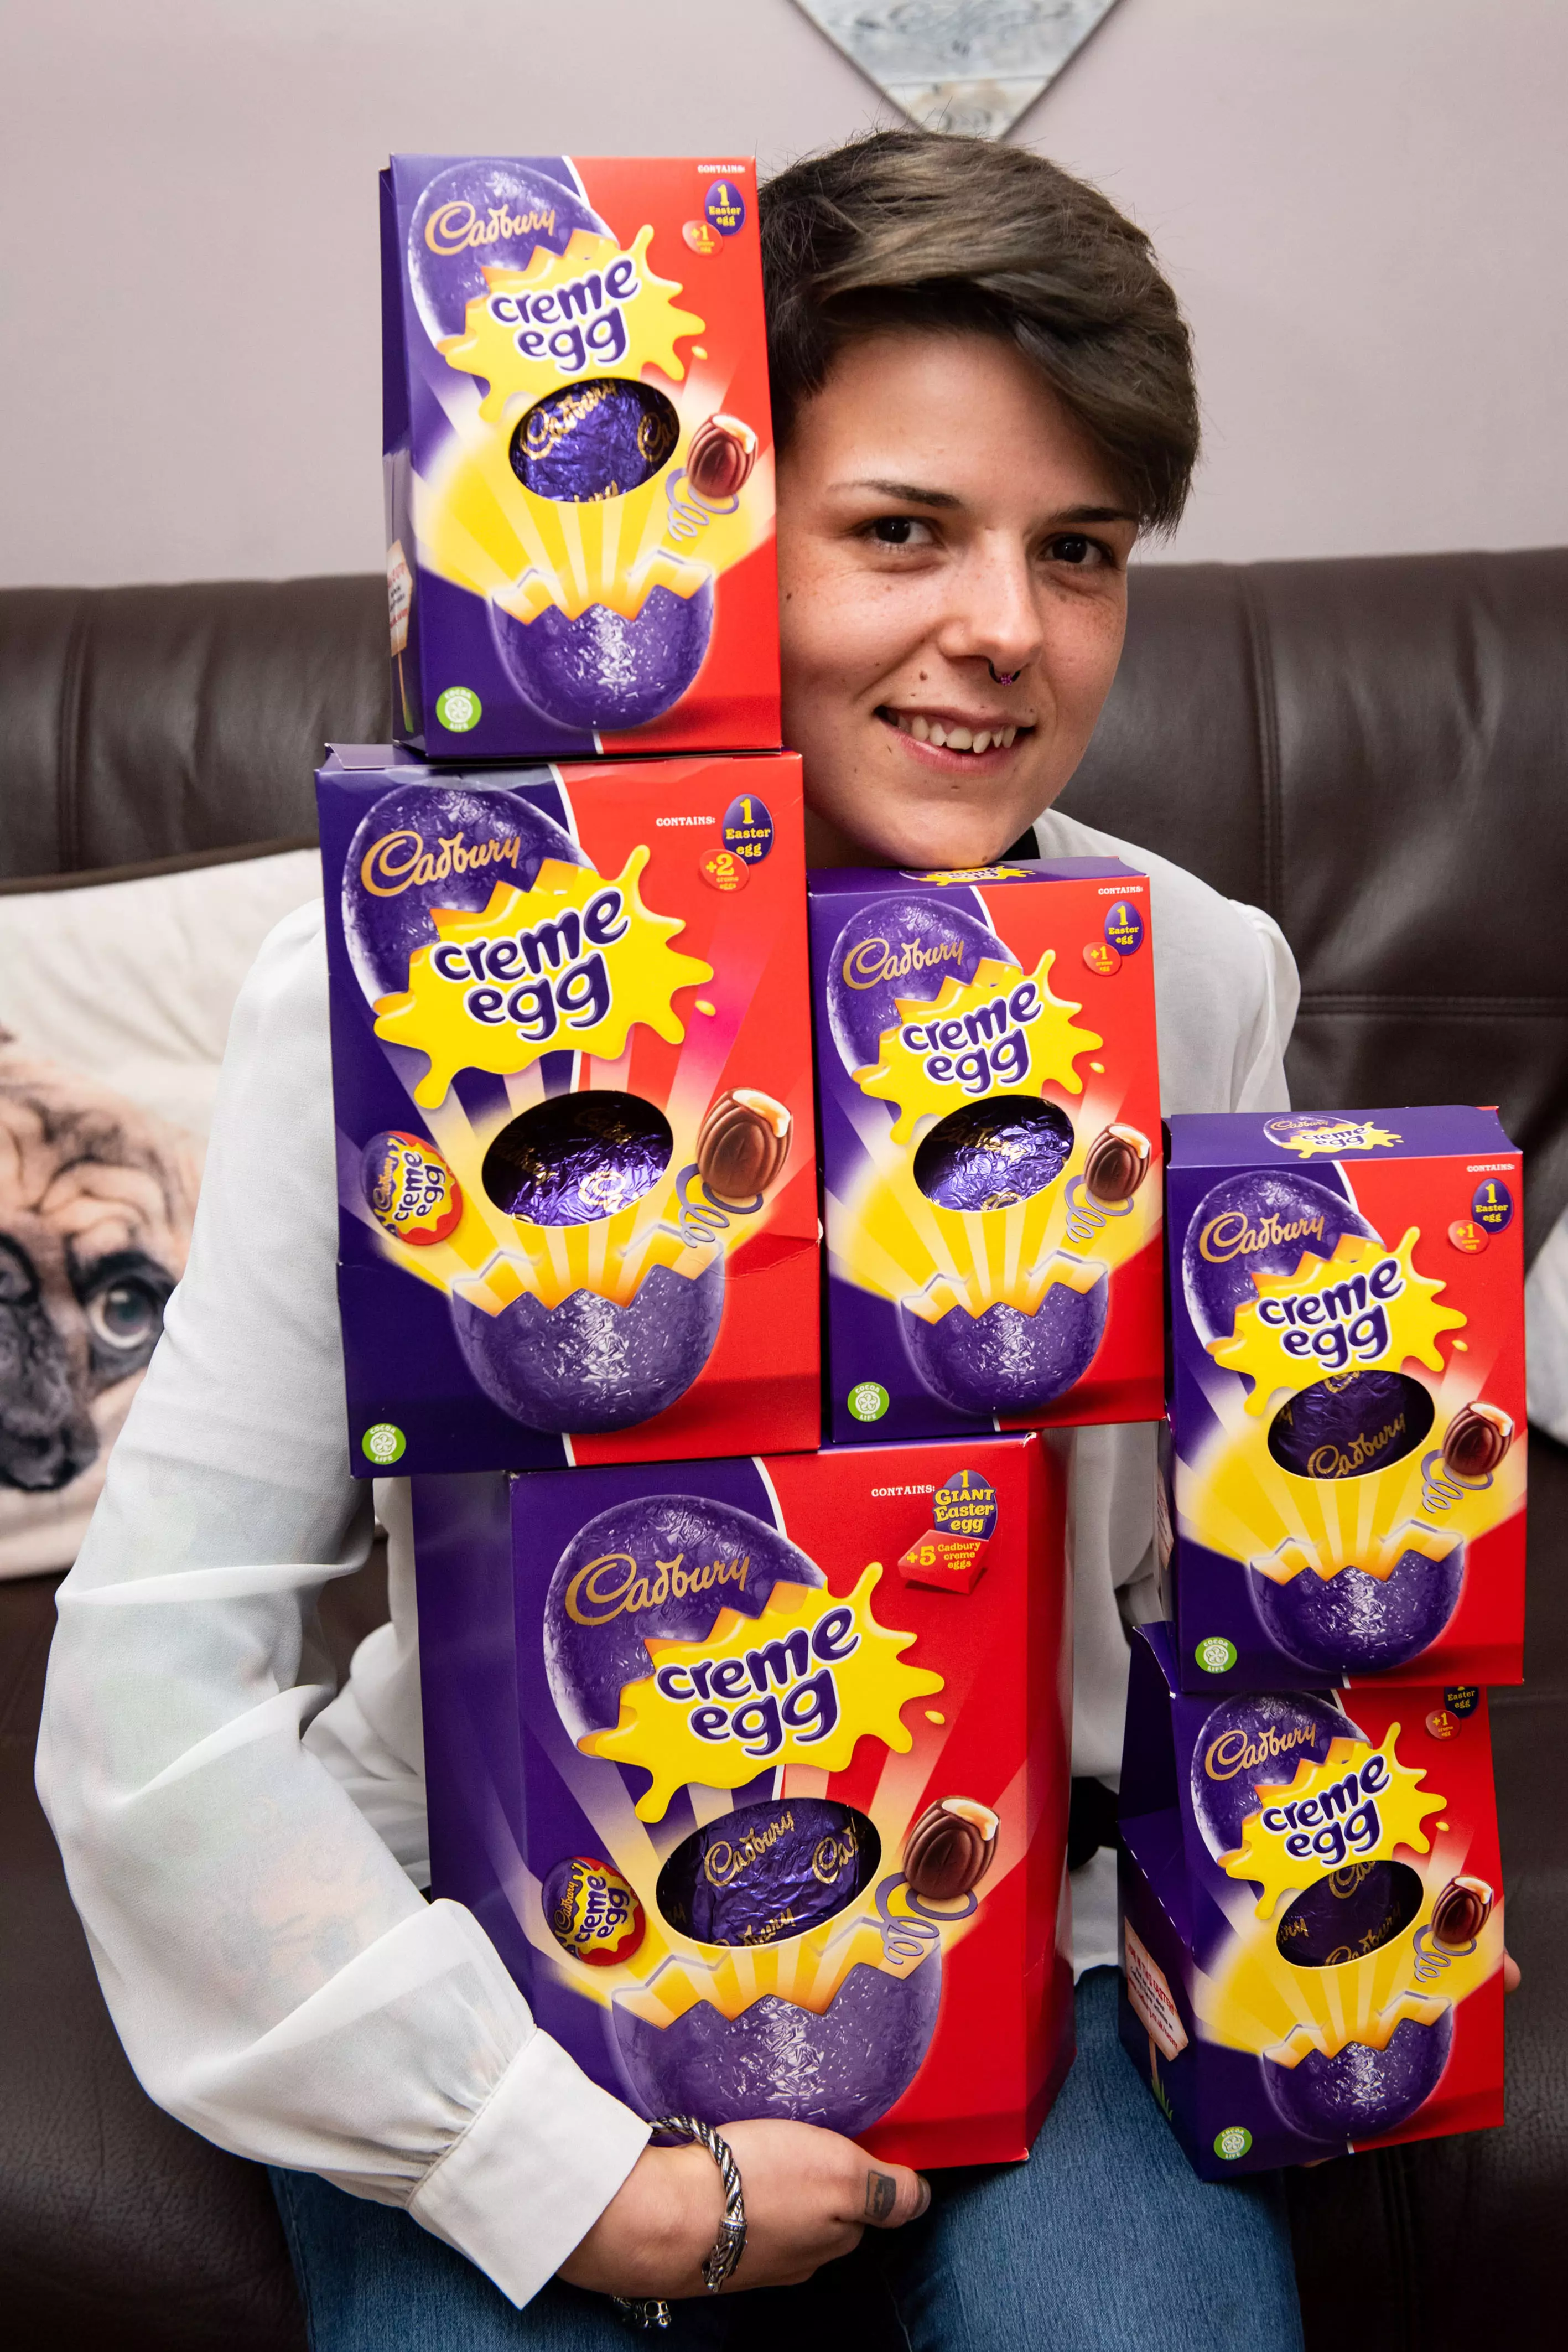 Jennifer says she's loved Creme Eggs since she was a child.